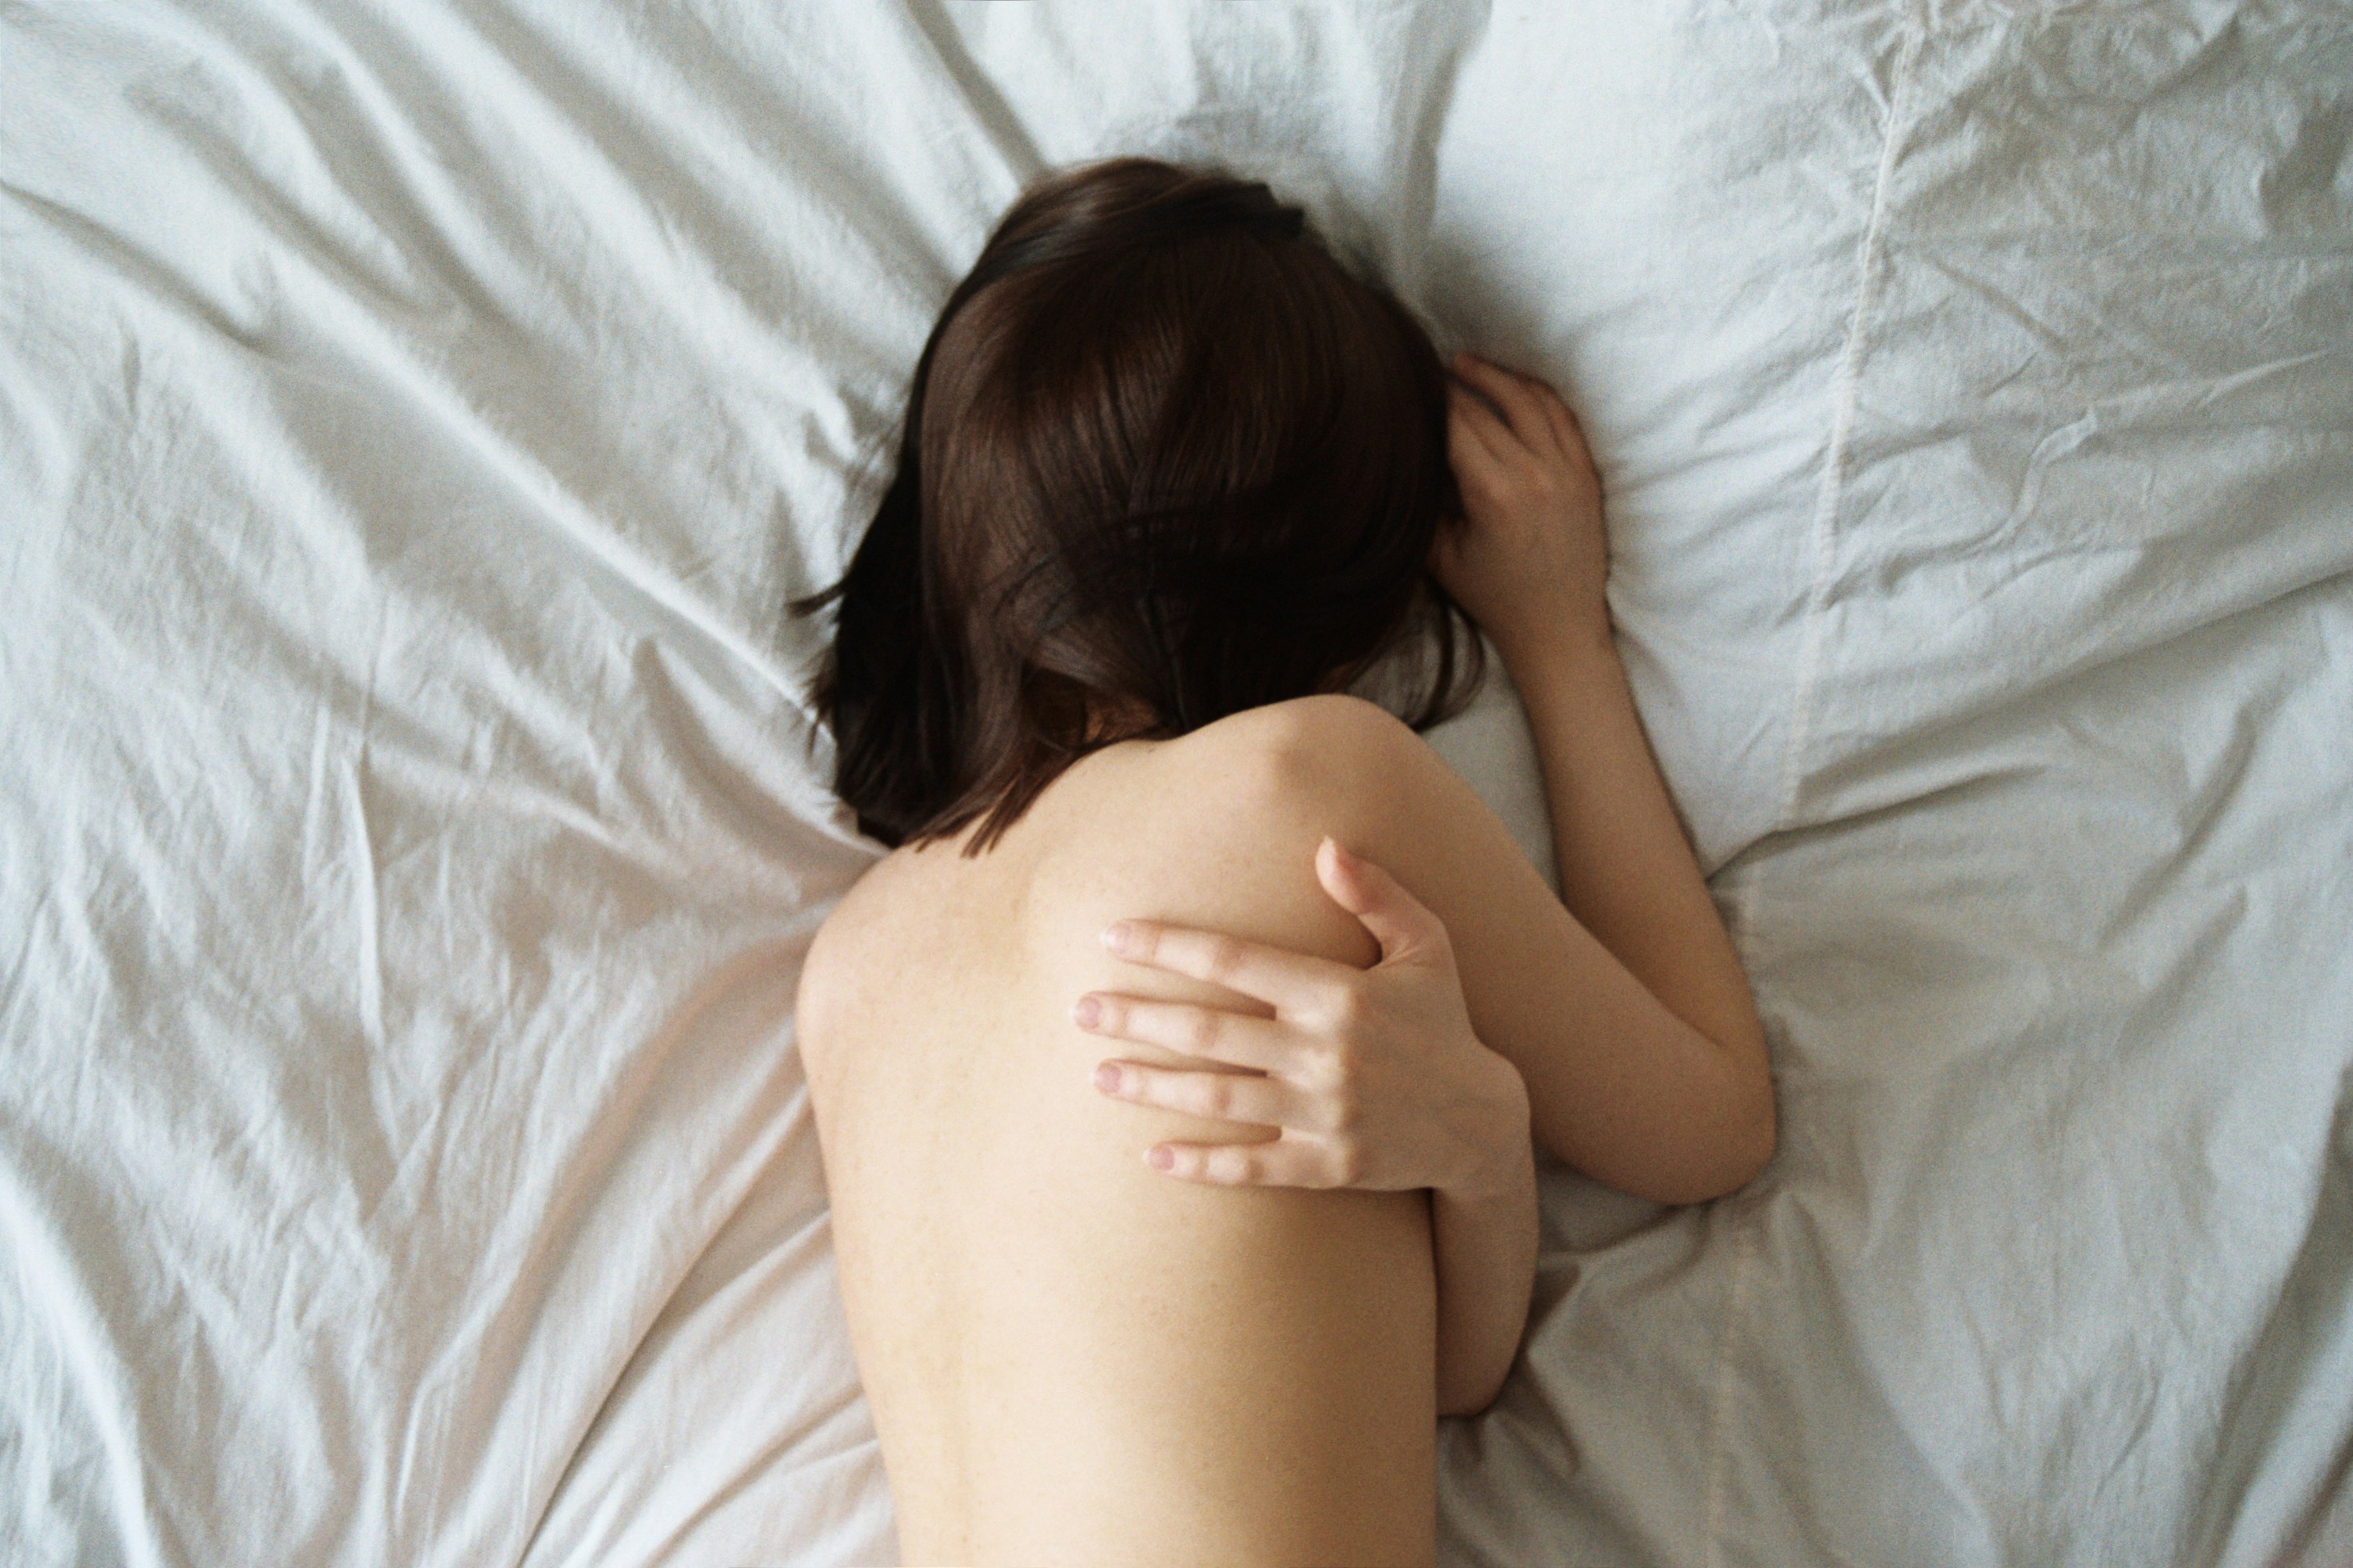 brent jodie hough recommends caught sleeping naked tumblr pic